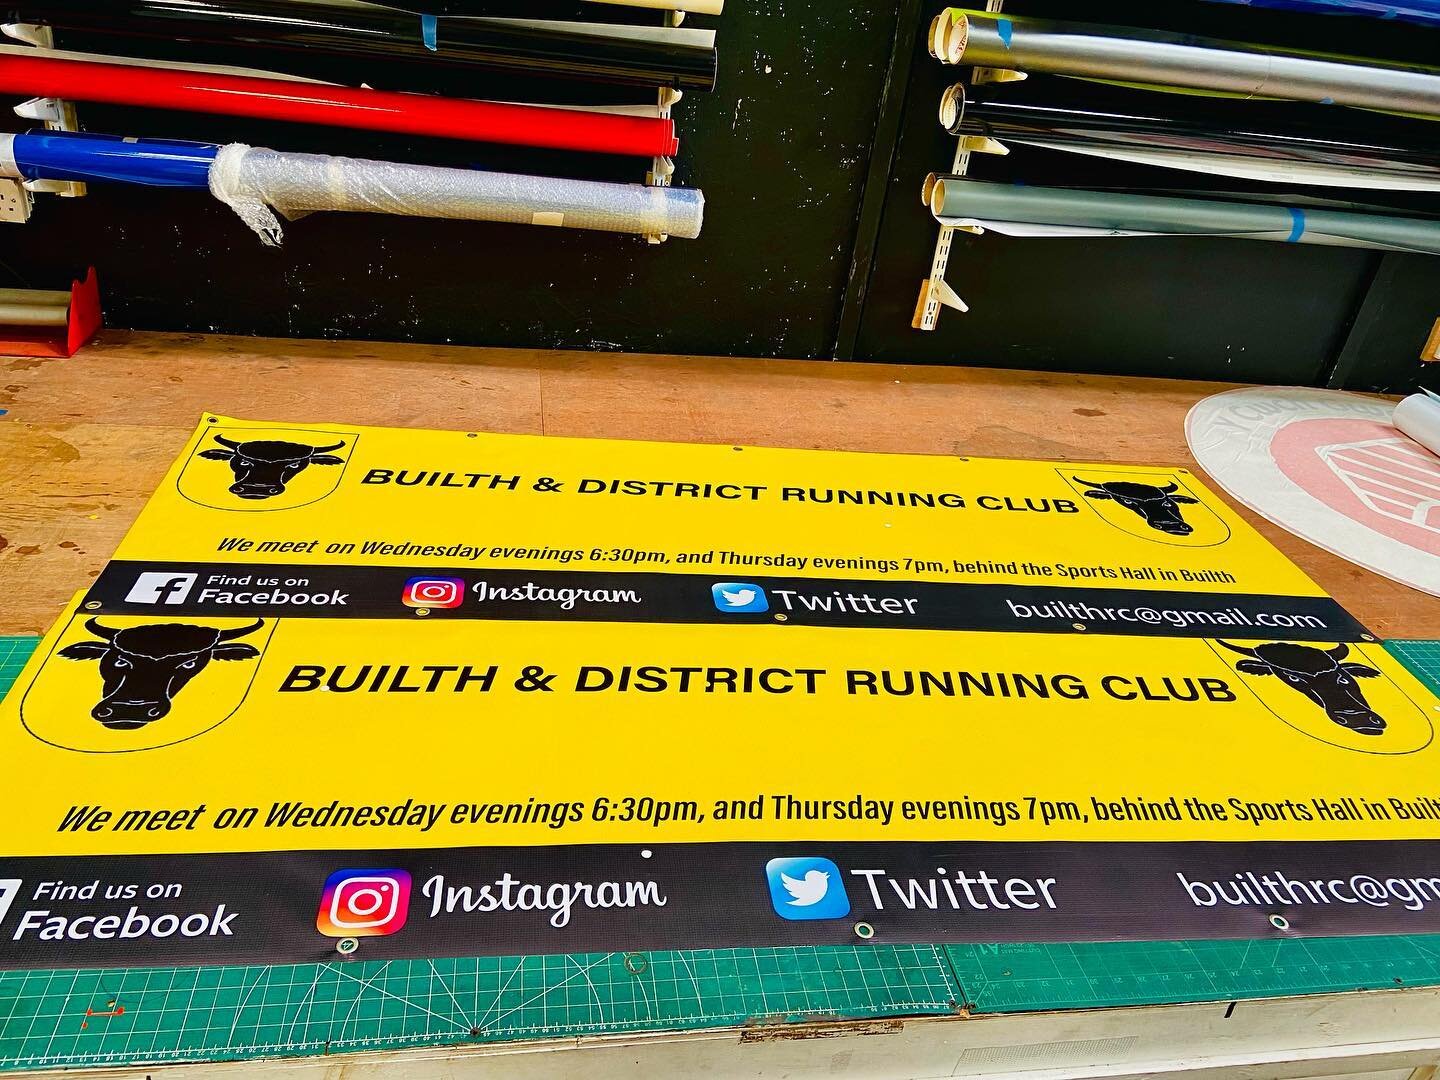 6x2ft Banners printed for Builth &amp; District Running Club #signs #tints #wraps #banners